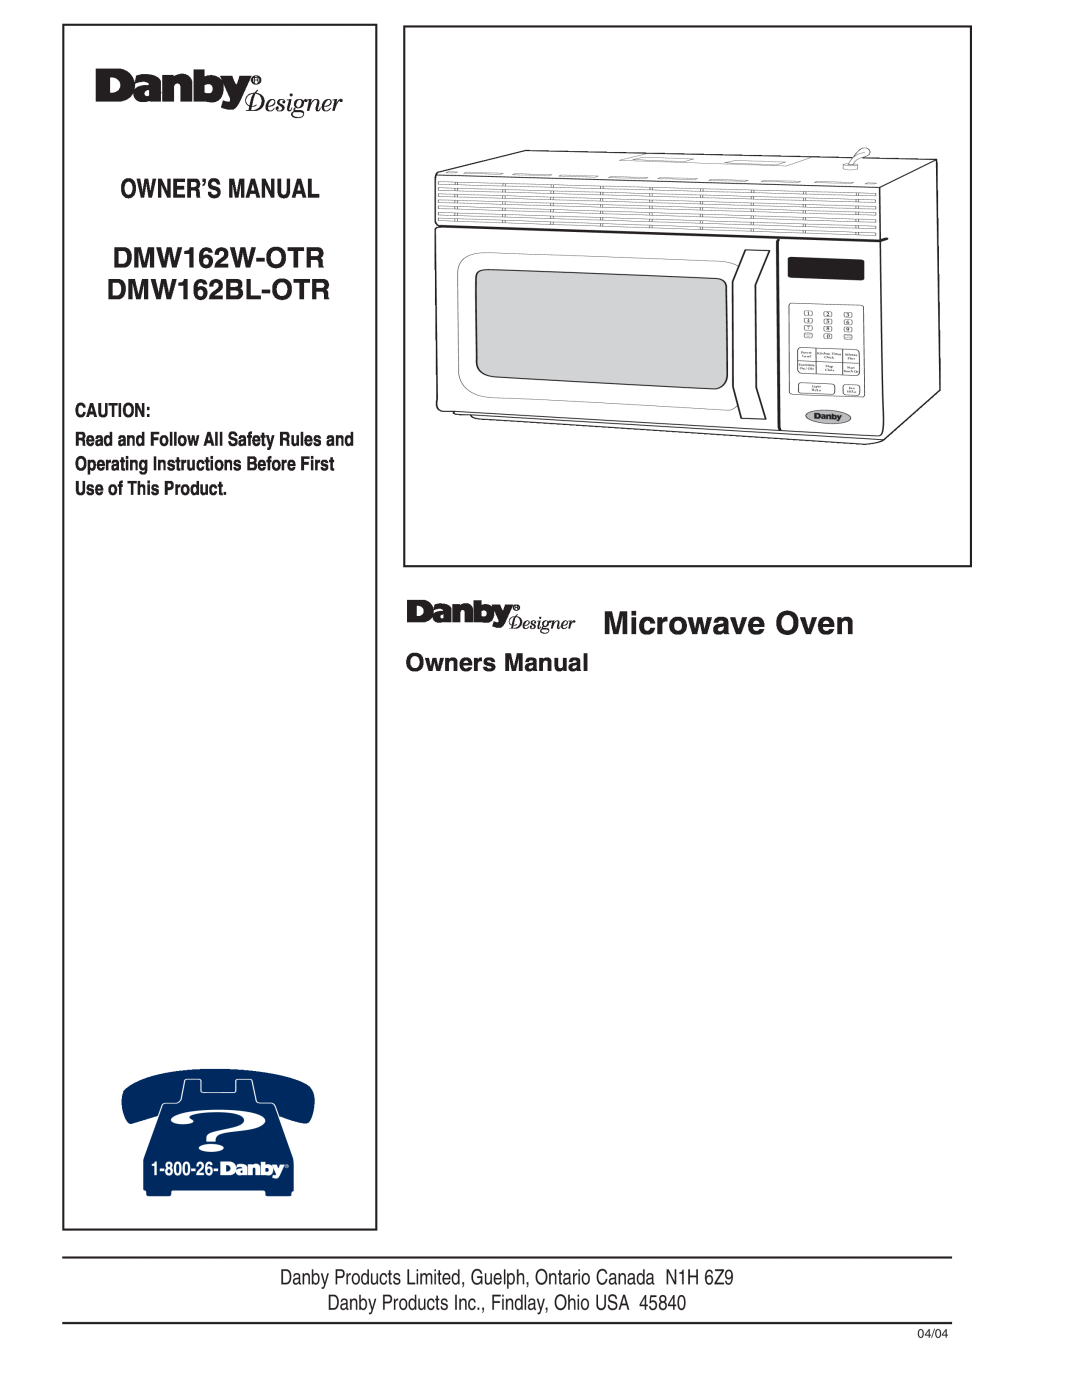 Danby owner manual Microwave Oven, DMW162W-OTR DMW162BL-OTR, Use of This Product, Operating Instructions Before First 